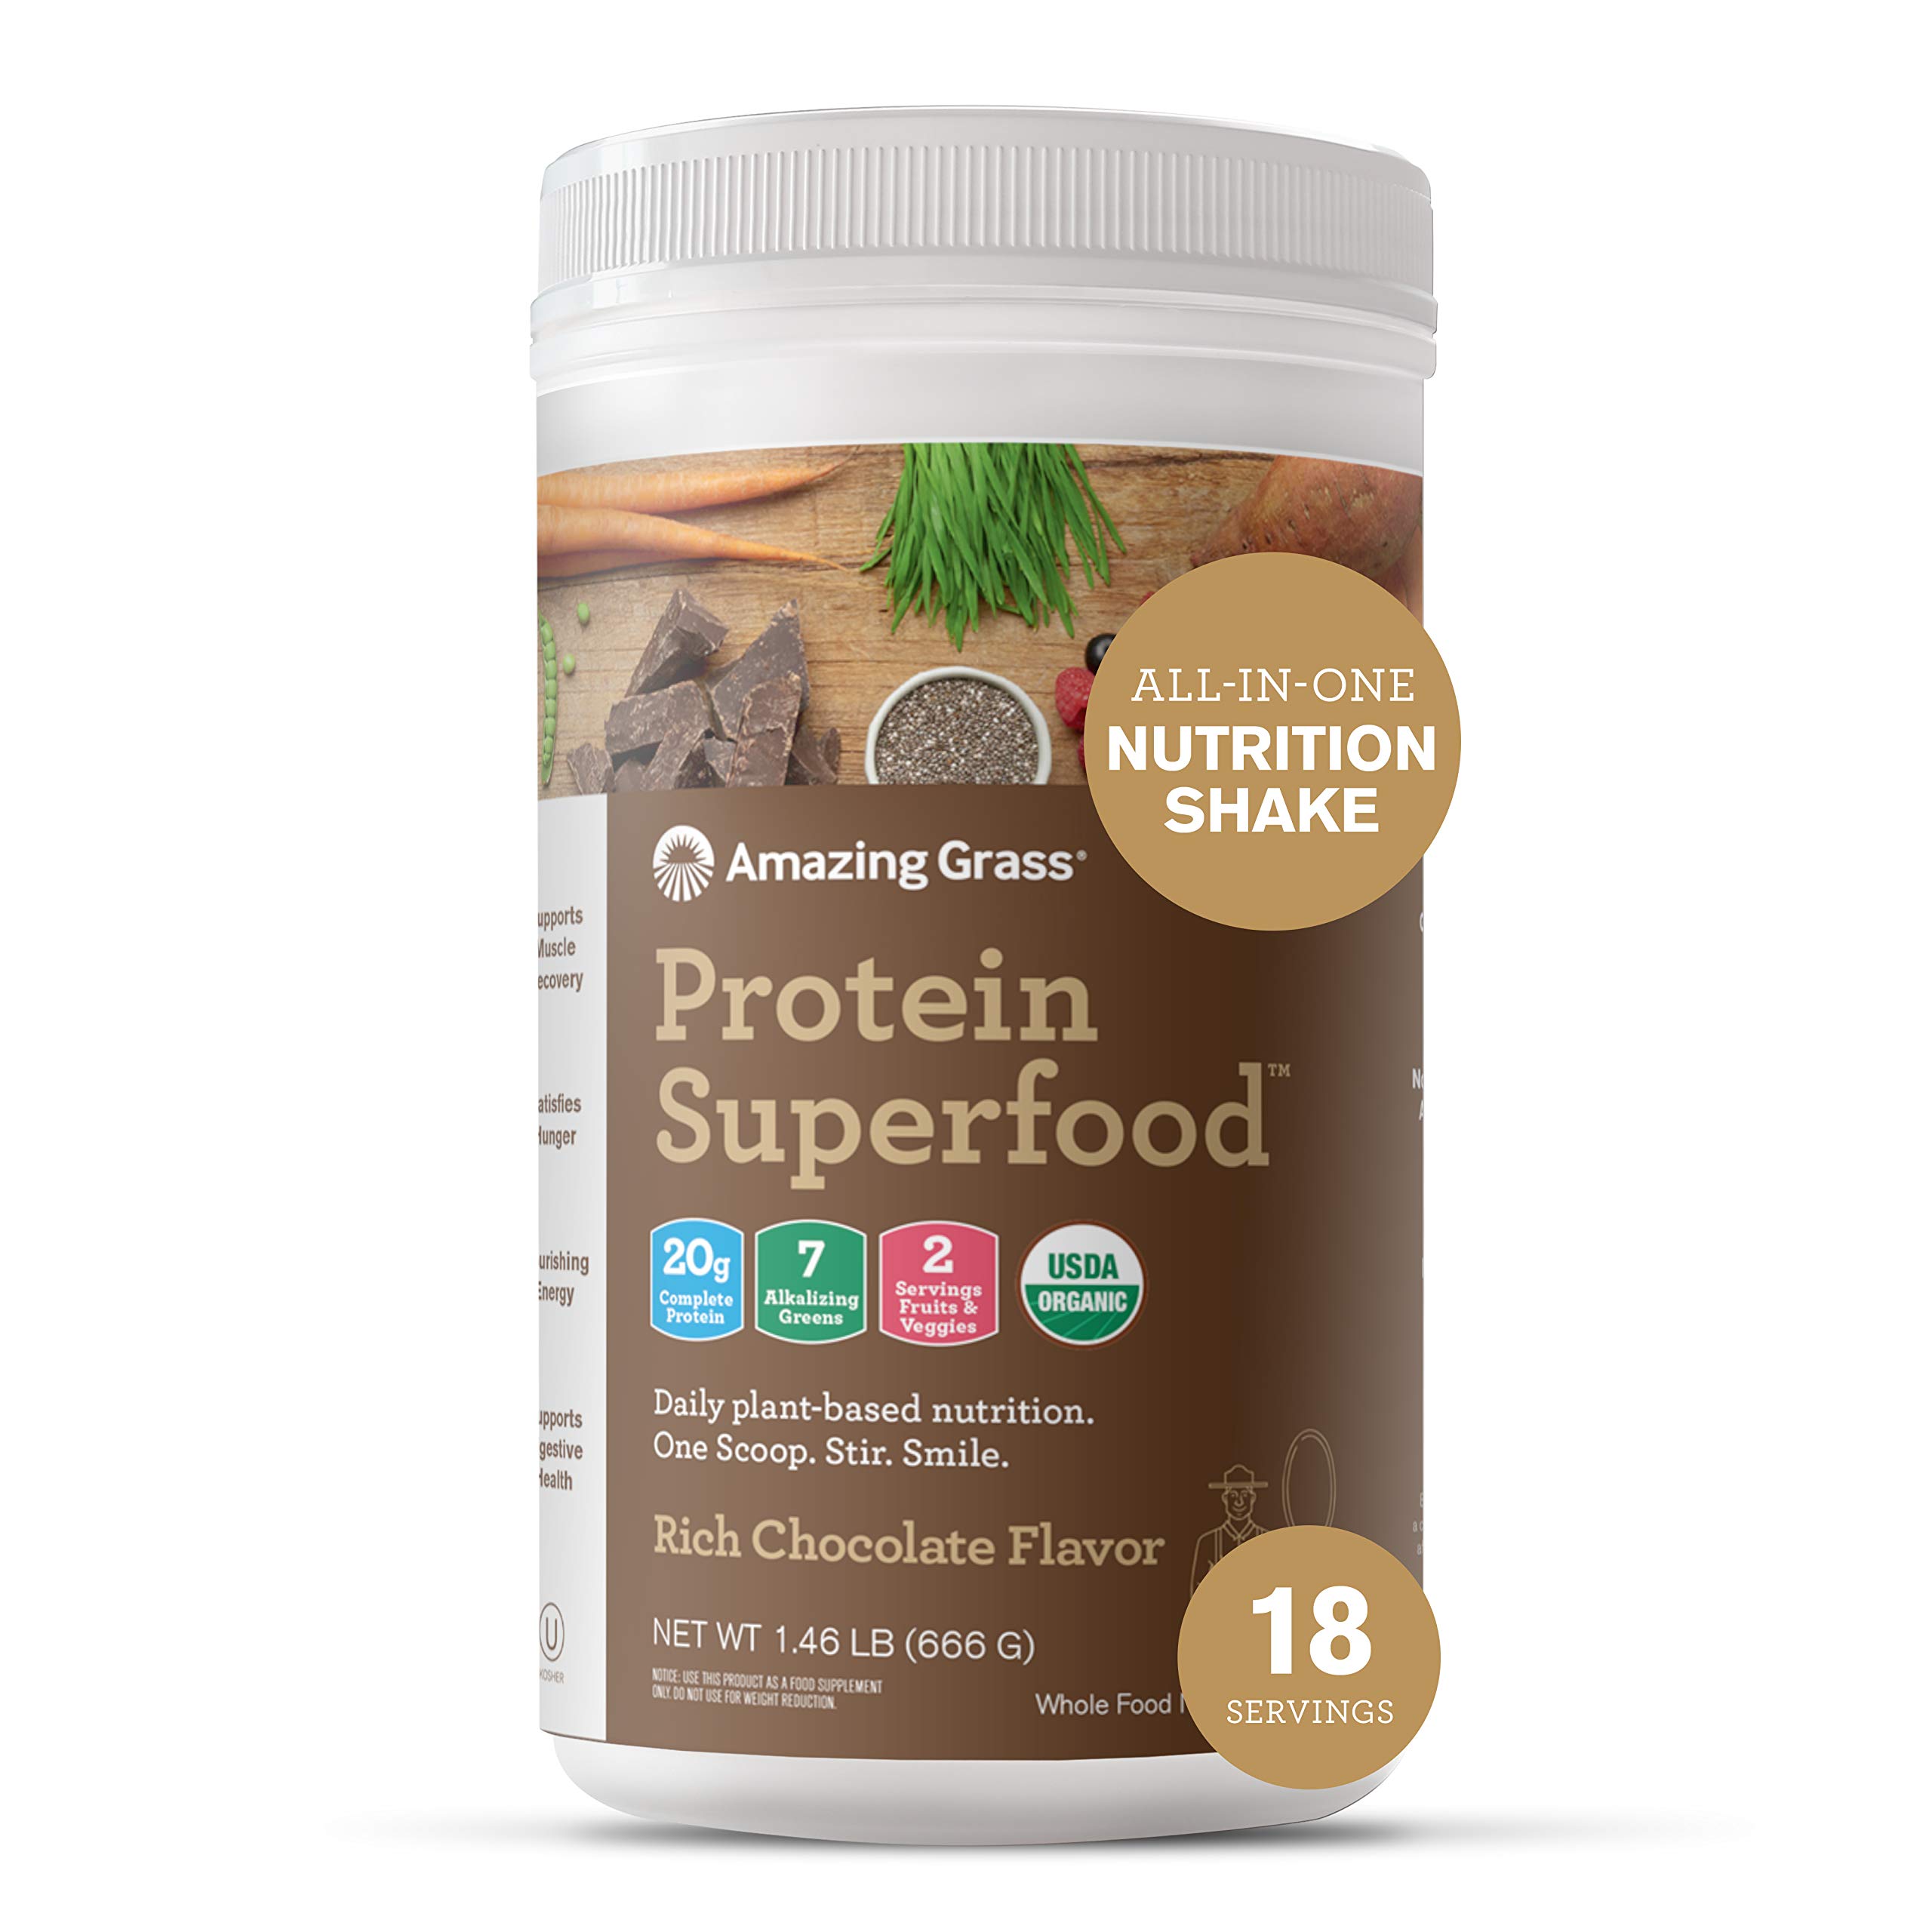 Amazing Grass Vegan Protein Superfood, All in One Nutrition Shake with Beet Root Powder, Rich Chocolate, 22.9 Oz